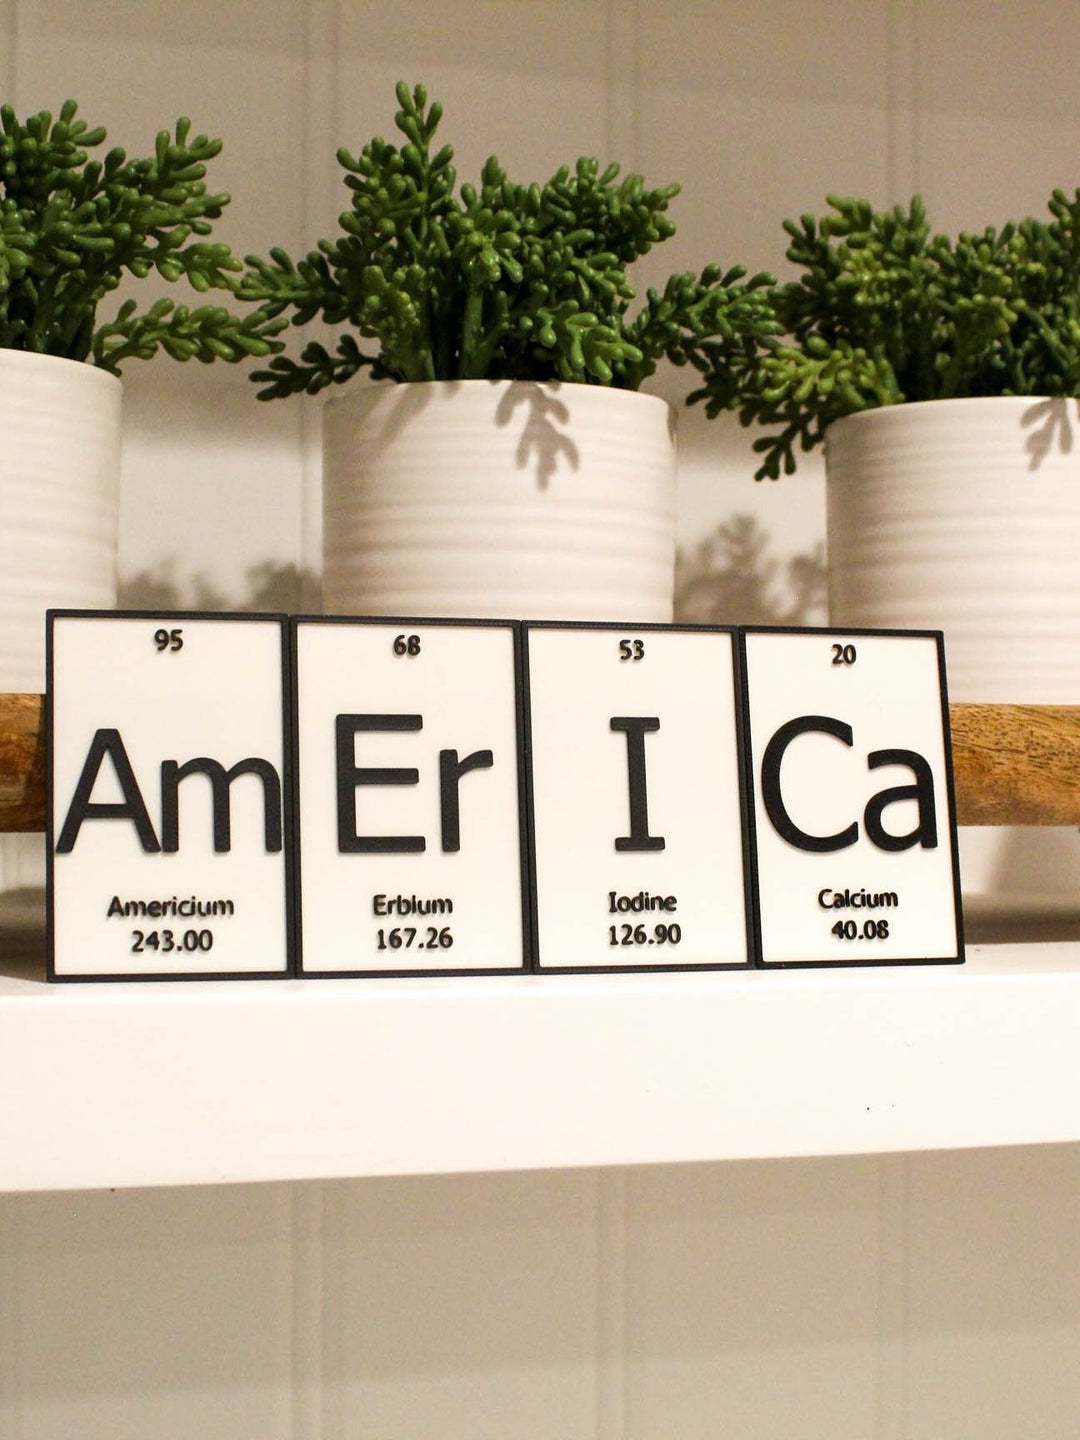 
  
  AmErIcaN | Periodic Table of Elements Wall, Desk or Shelf Sign
  
